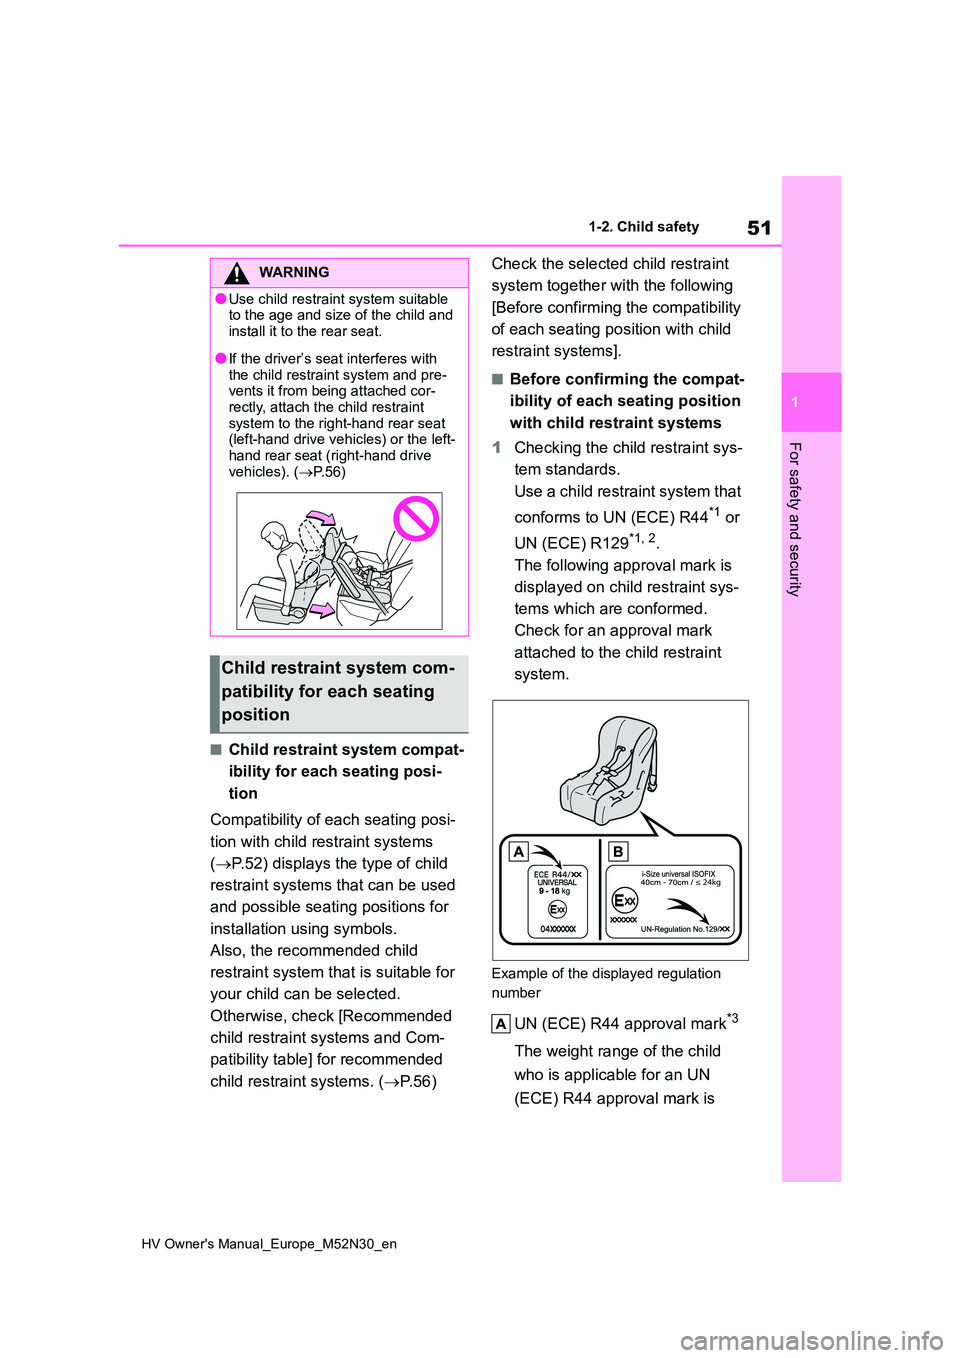 TOYOTA YARIS 2022 User Guide 51
1
HV Owner's Manual_Europe_M52N30_en
1-2. Child safety
For safety and security
■Child restraint system compat- 
ibility for each seating posi- 
tion 
Compatibility of each seating posi- 
tion